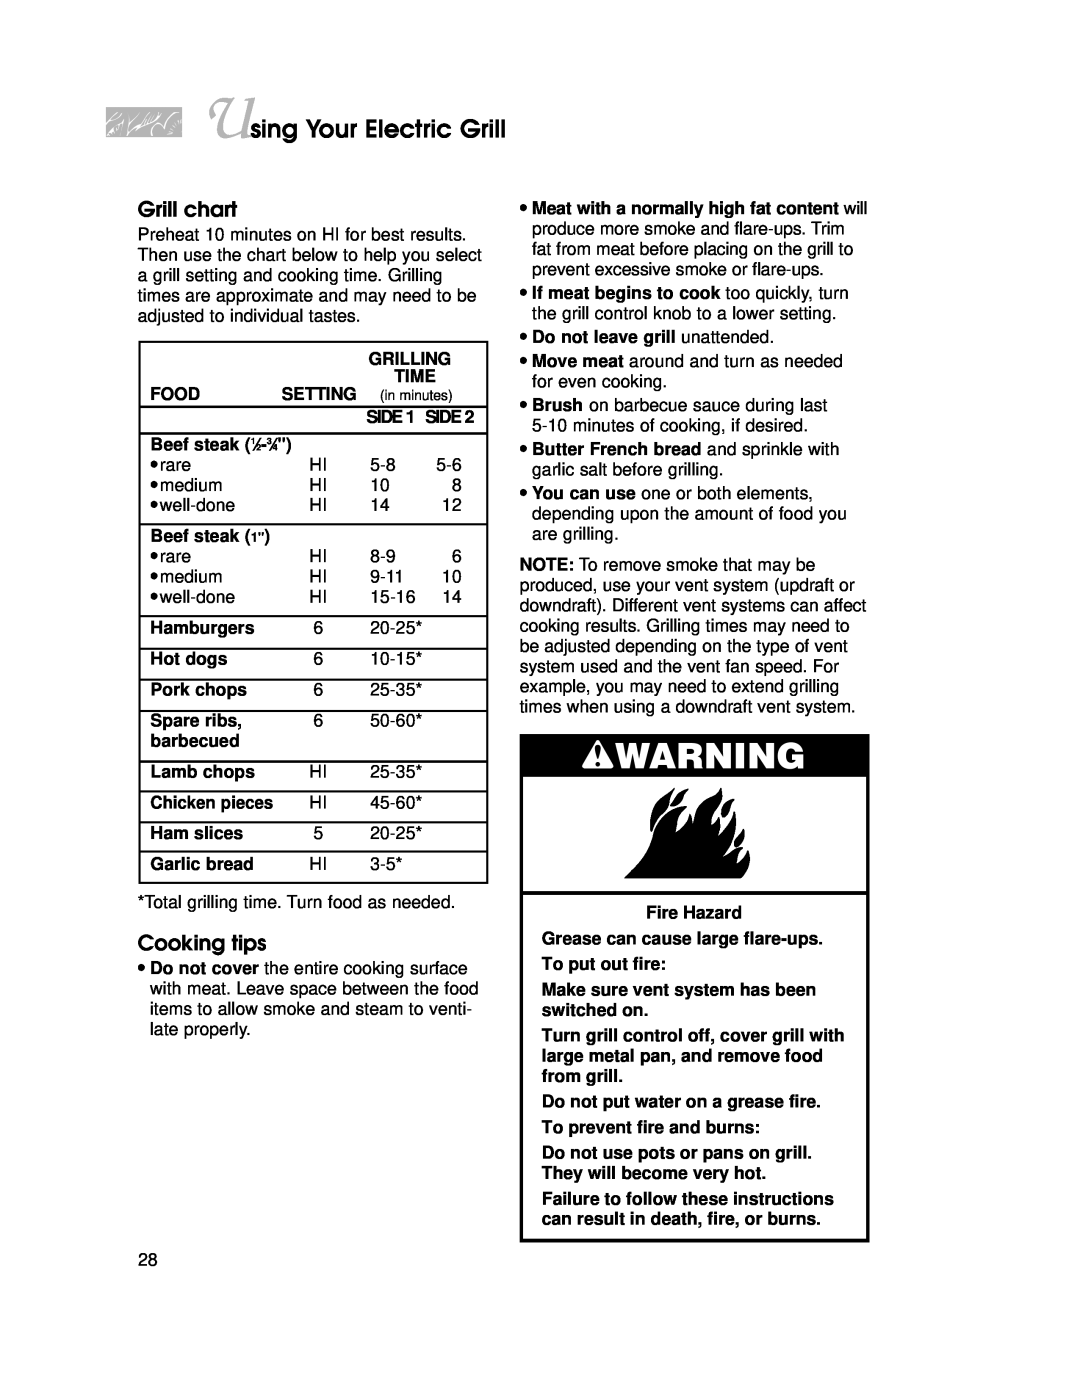 KitchenAid KGCT025, KSVD060B, KKECT025, KECG020, KECC027 Using Your Electric Grill, Grill chart, Cooking tips 